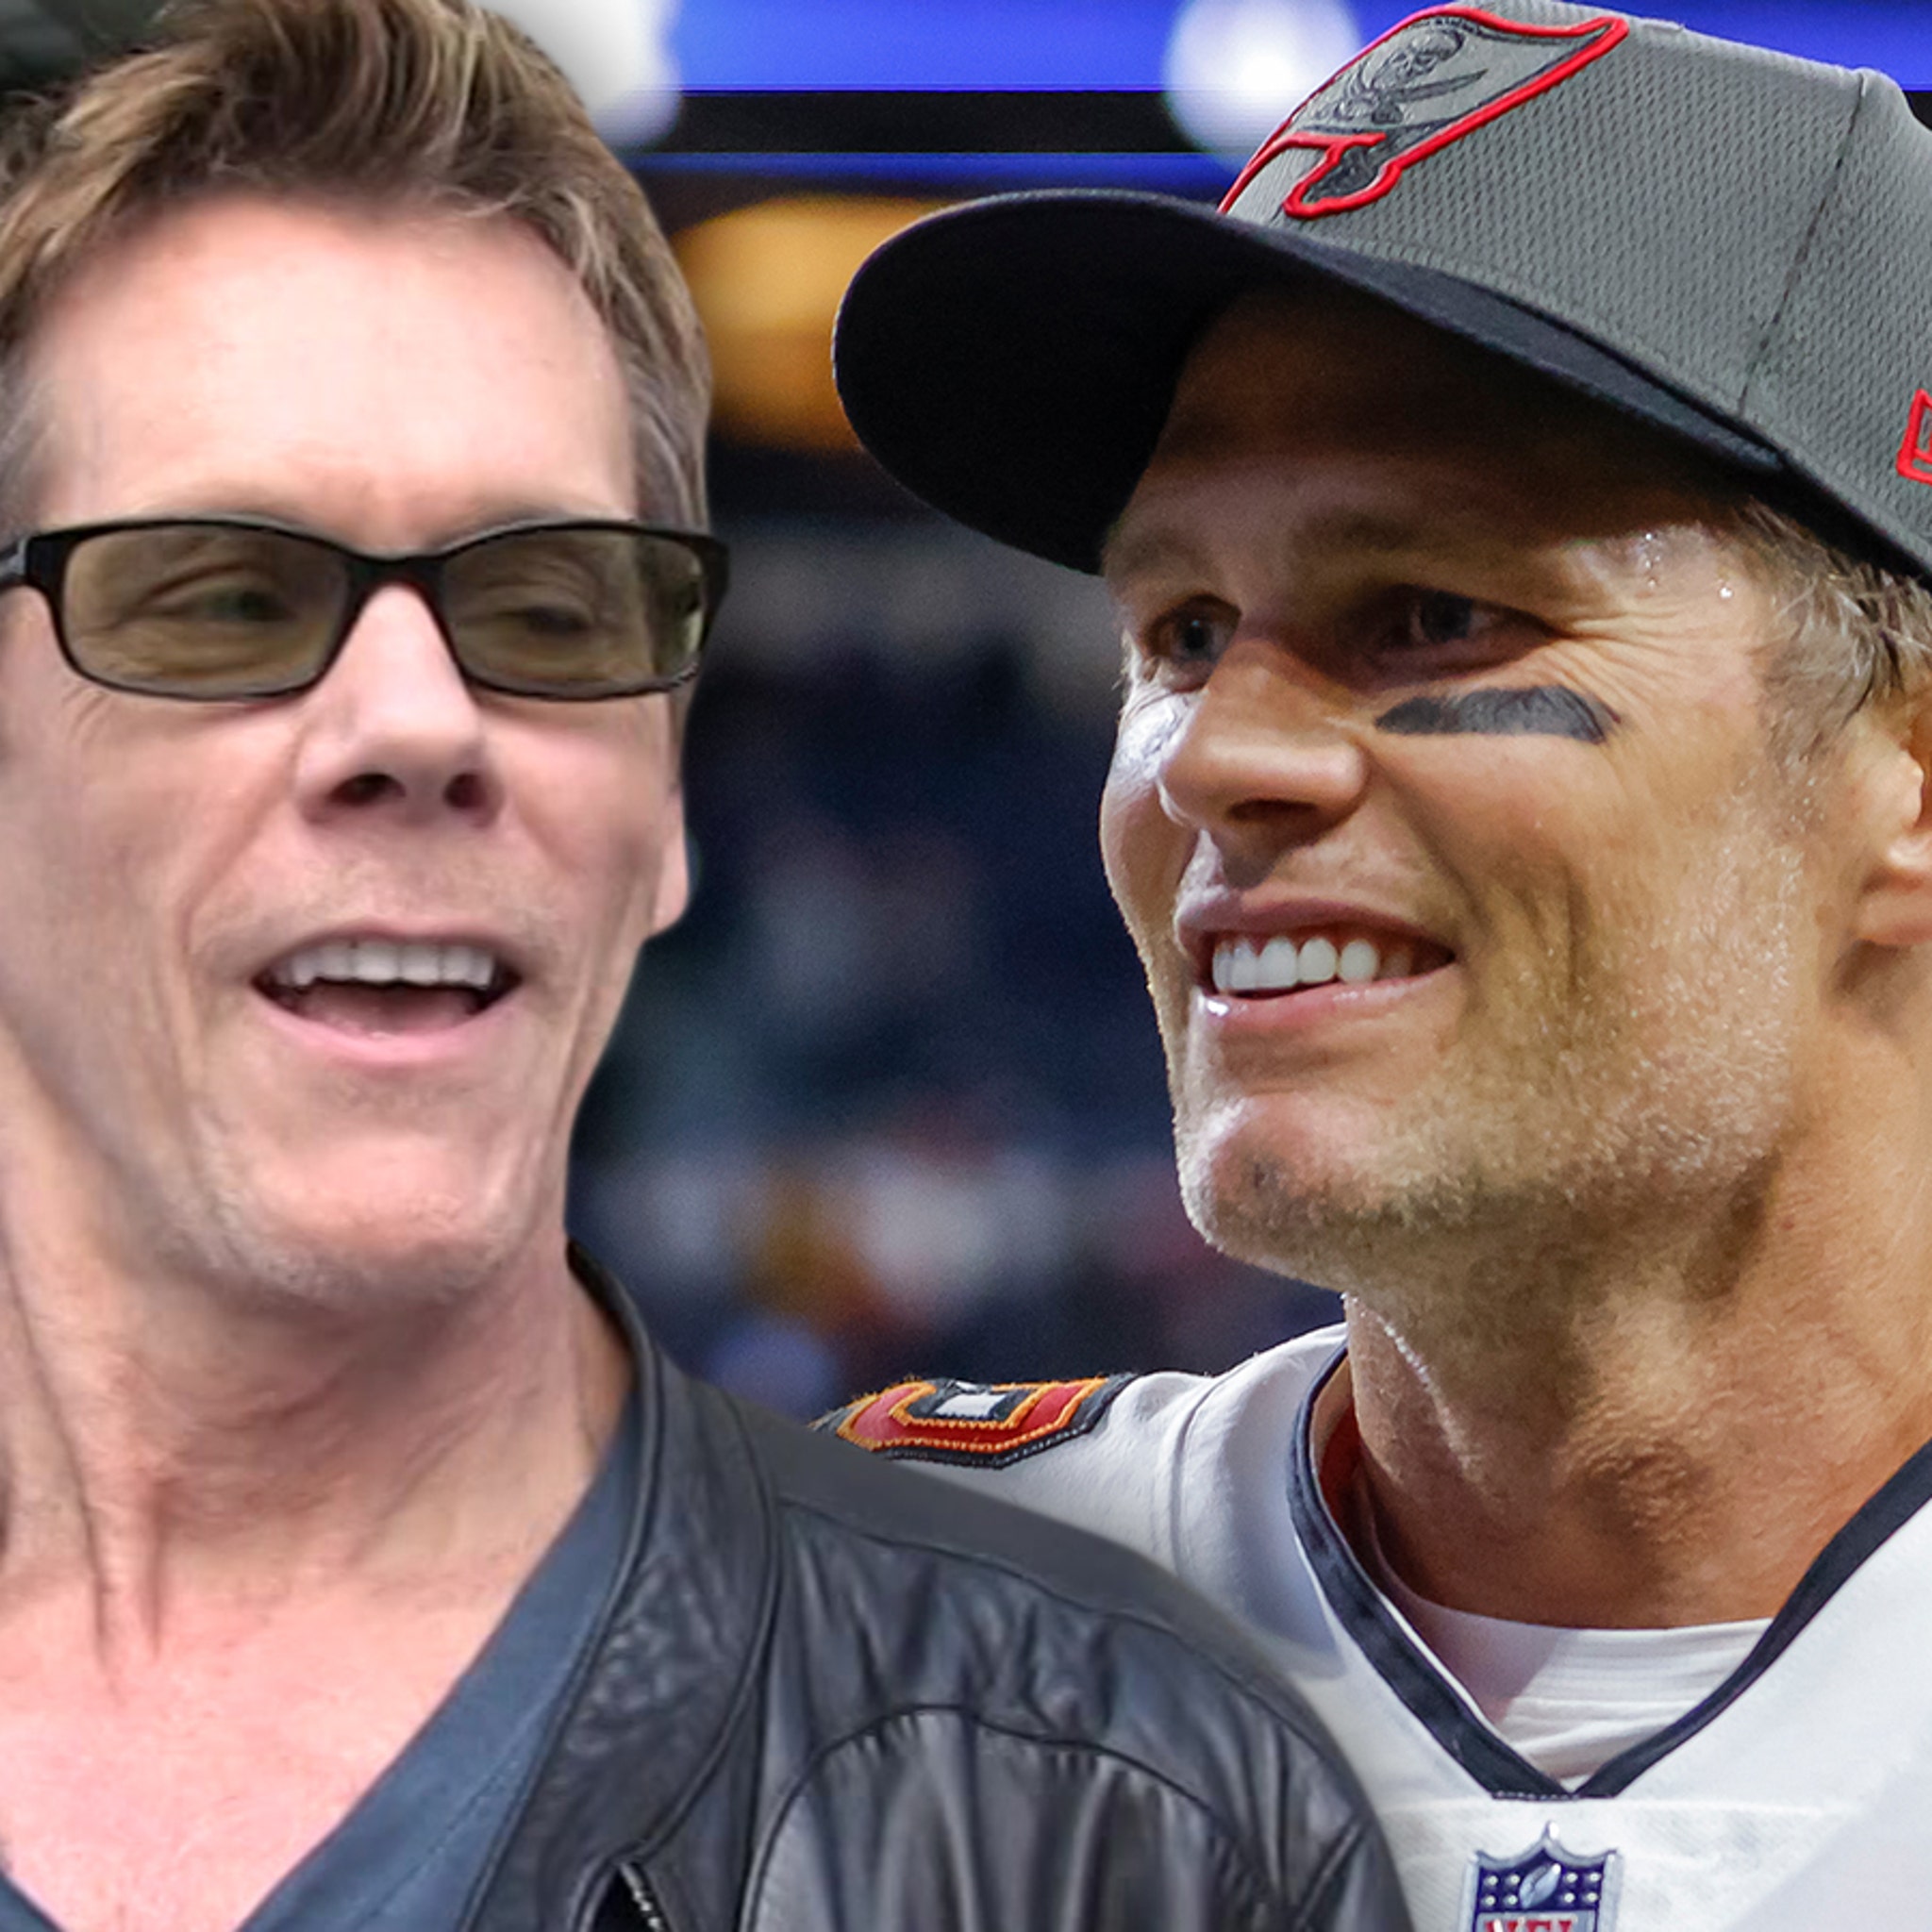 Kevin Bacon Sings Song About Tom Brady Retirement Next to His Goats